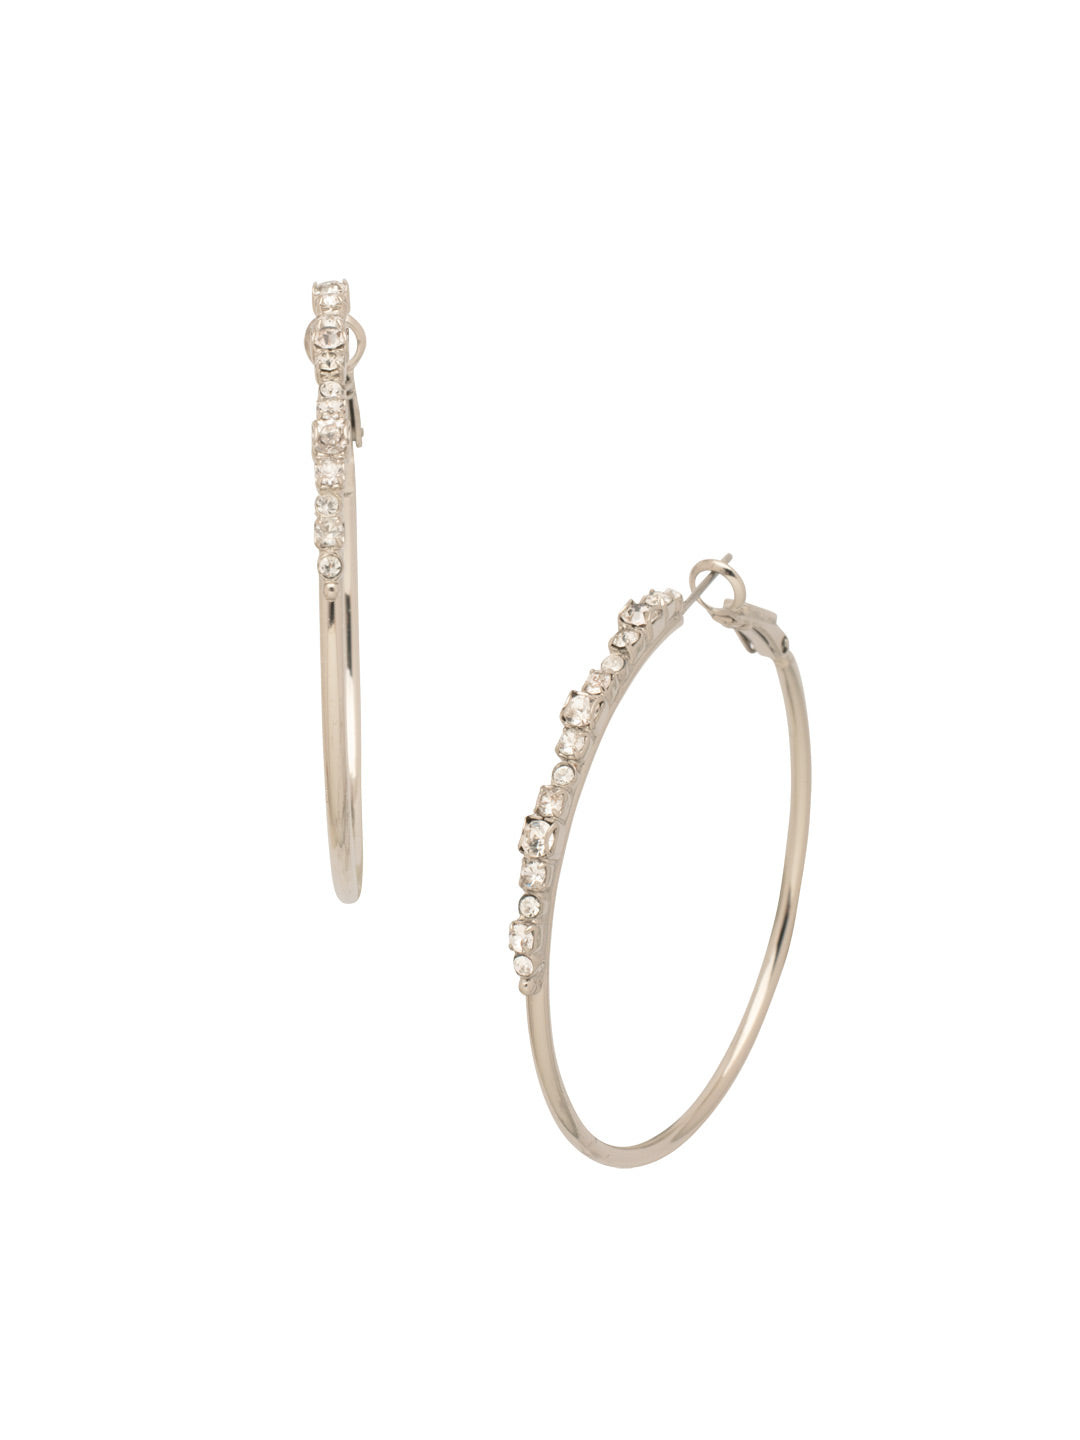 Hoopla Hoop Earrings - EDN79RHCRY - <p>Worth making a fuss over, these crystal hoop earrings make a statement without feeling heavy and that's what the hoopla is about! From Sorrelli's Crystal collection in our Palladium Silver-tone finish.</p>